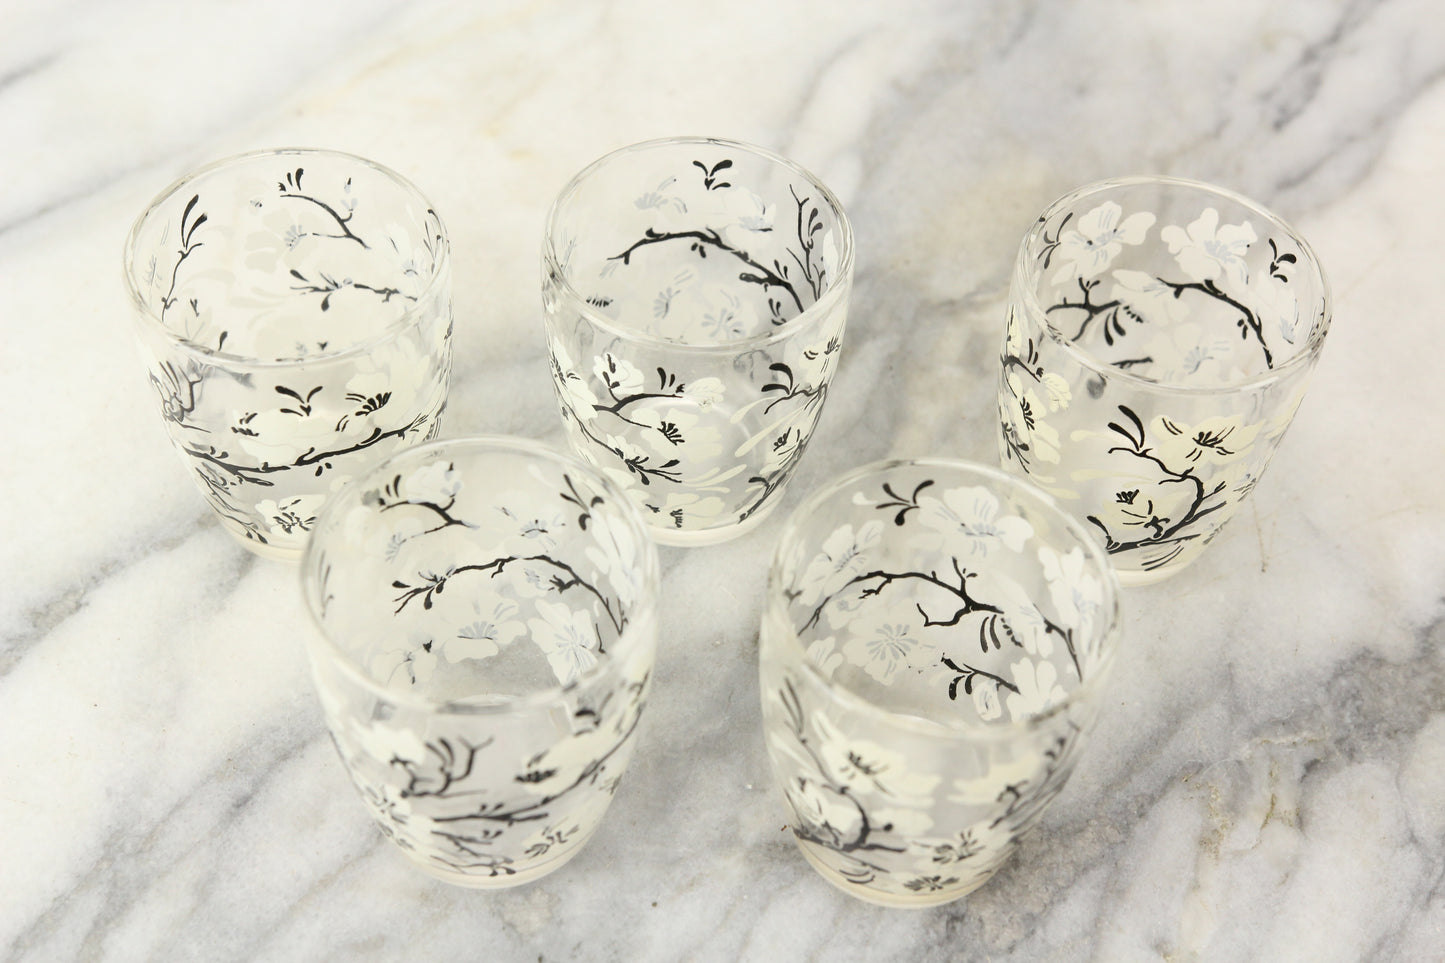 Small Glass Drinking Cups with White and Black Flower and Branch Design, Set of 5